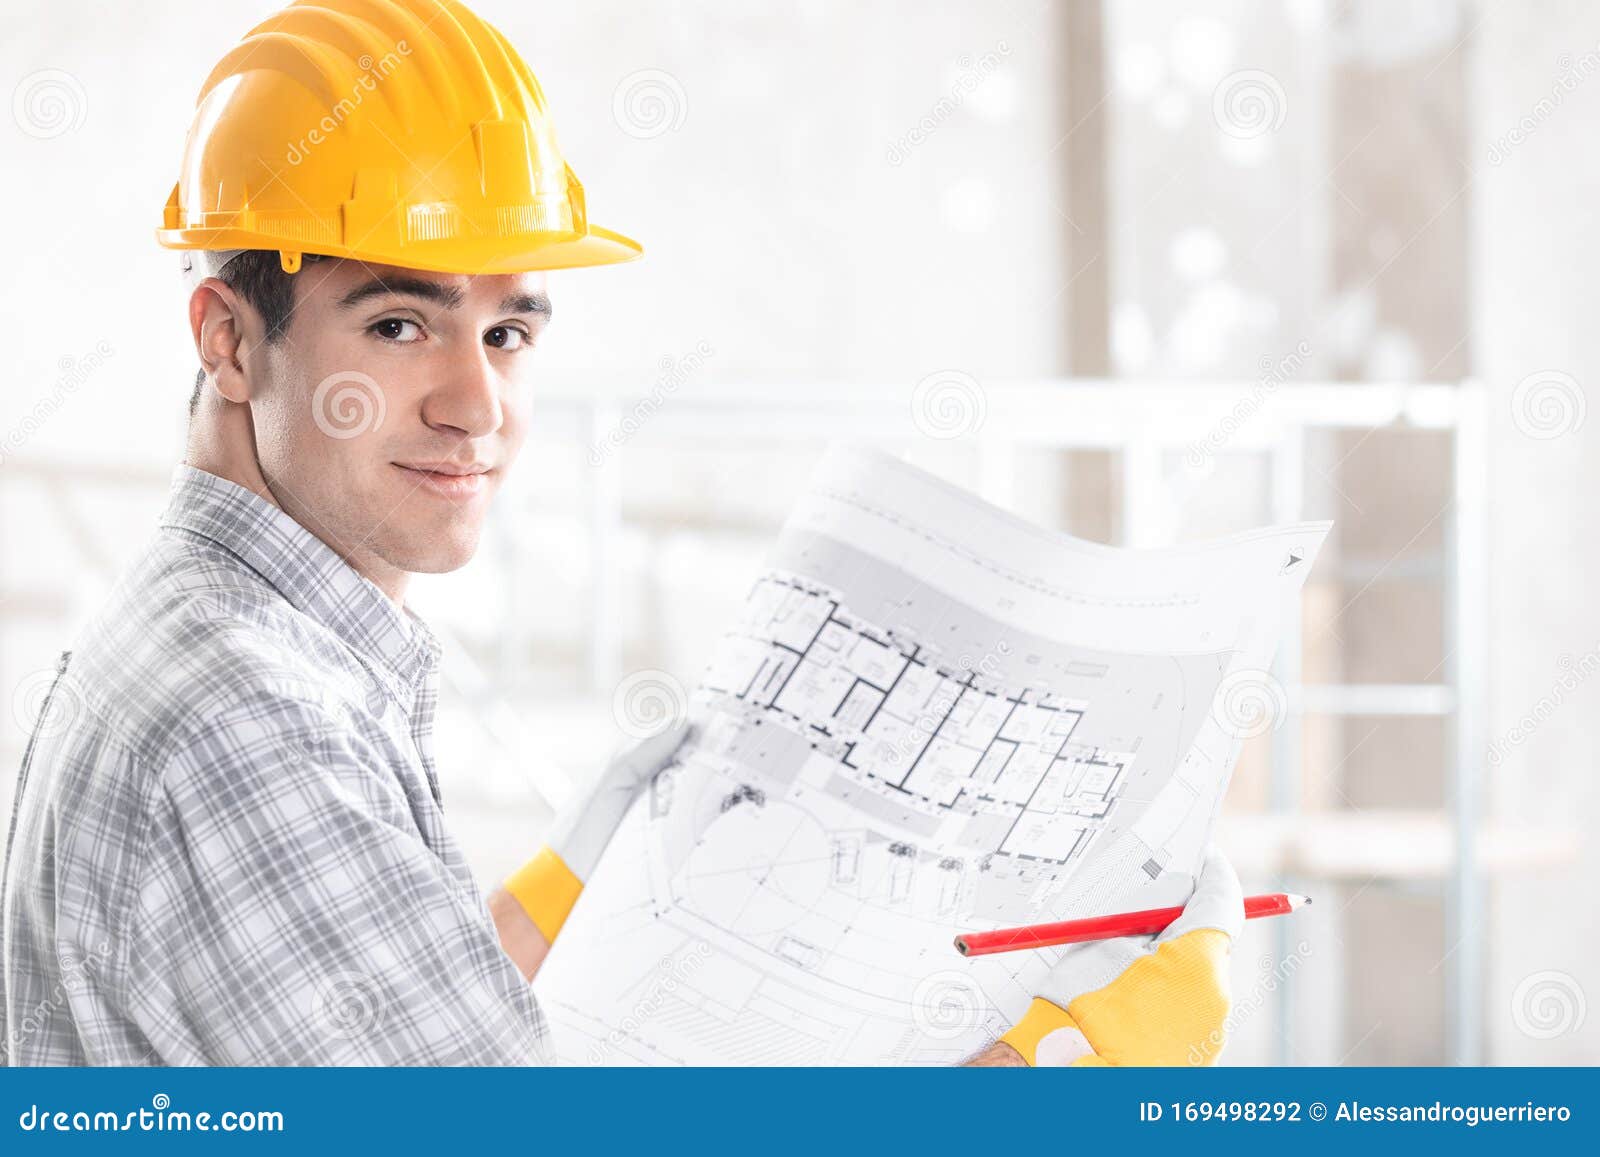 architect or structural engineer with blueprint